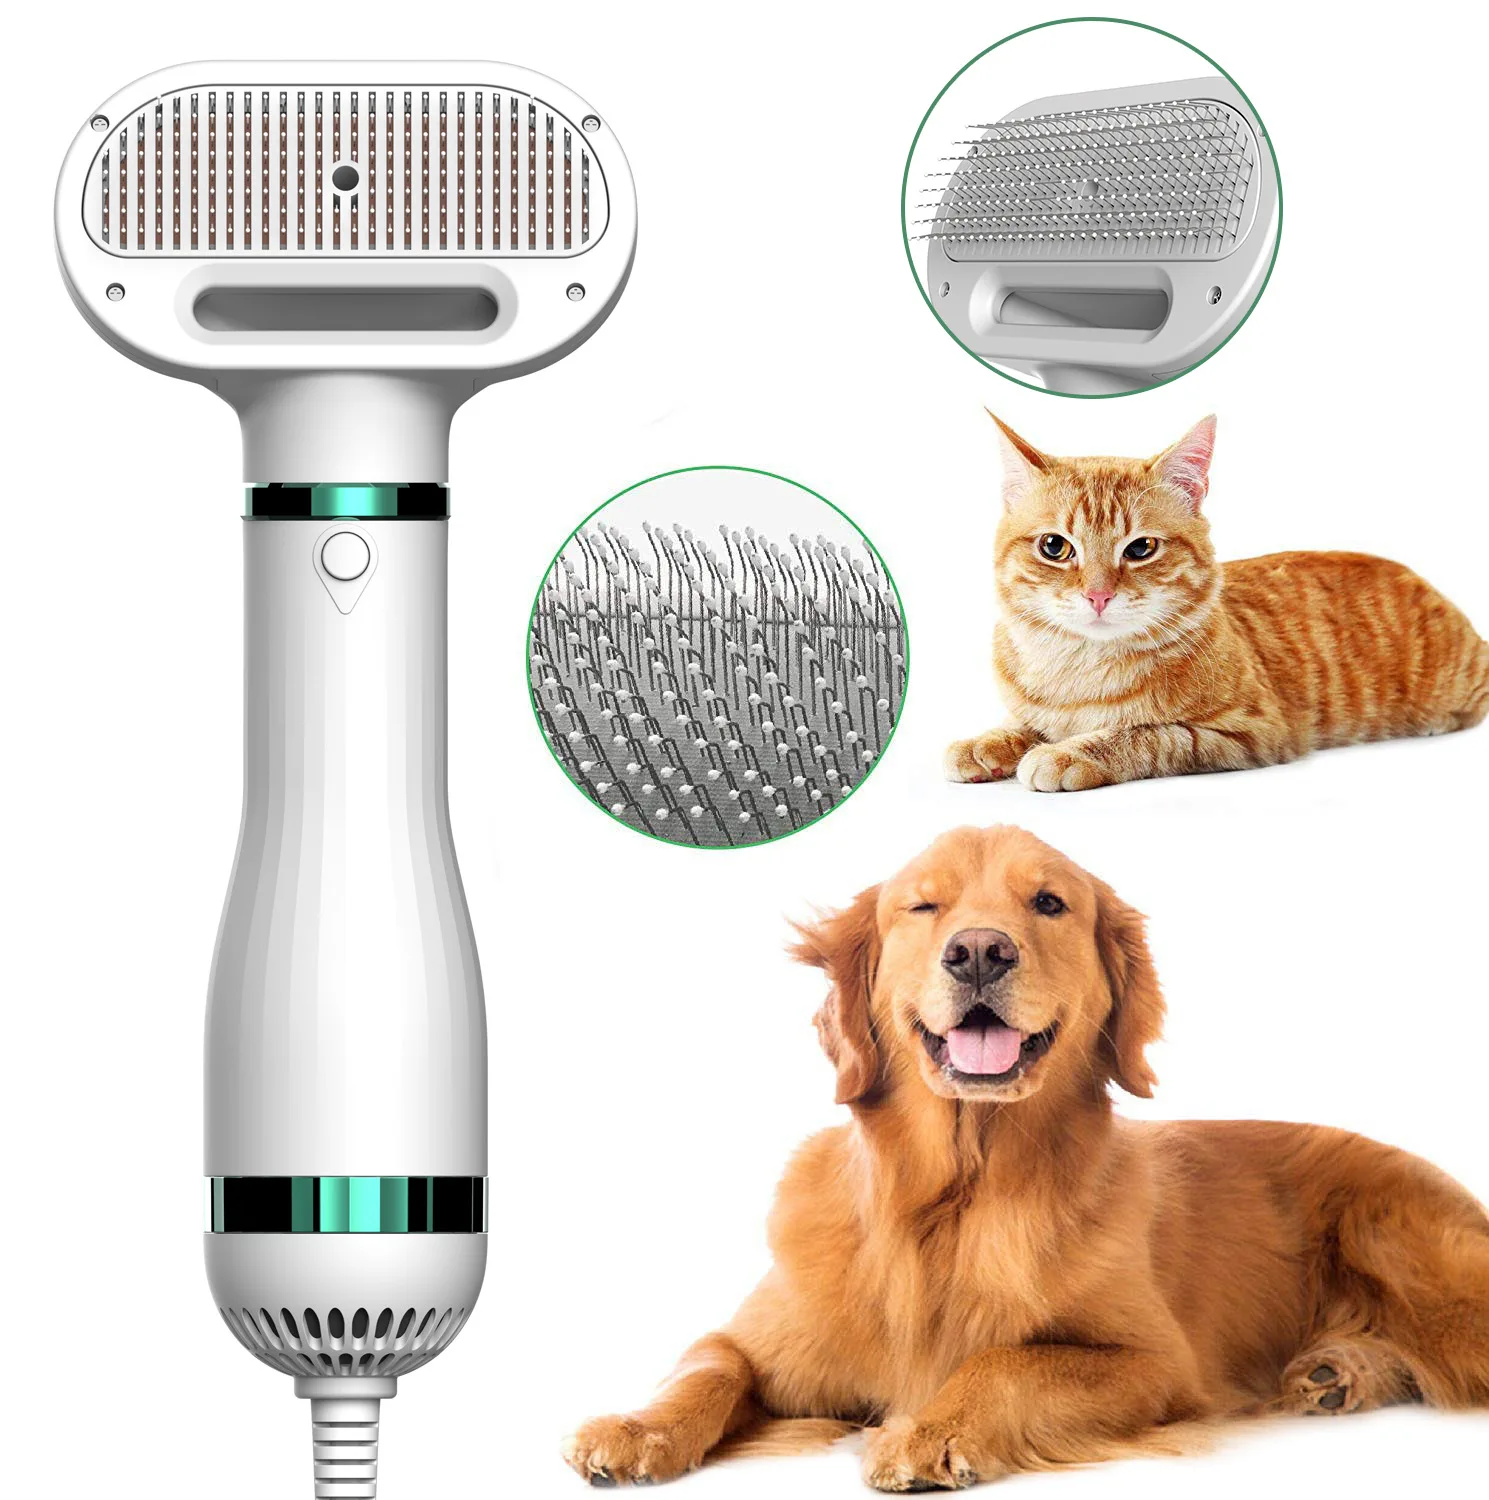 

2-In-1 Pet Hair Dryer Brush Grooming Blower Smart Adjustable Temperatures Settings for Small and Medium Dogs and Cats Pet Comb